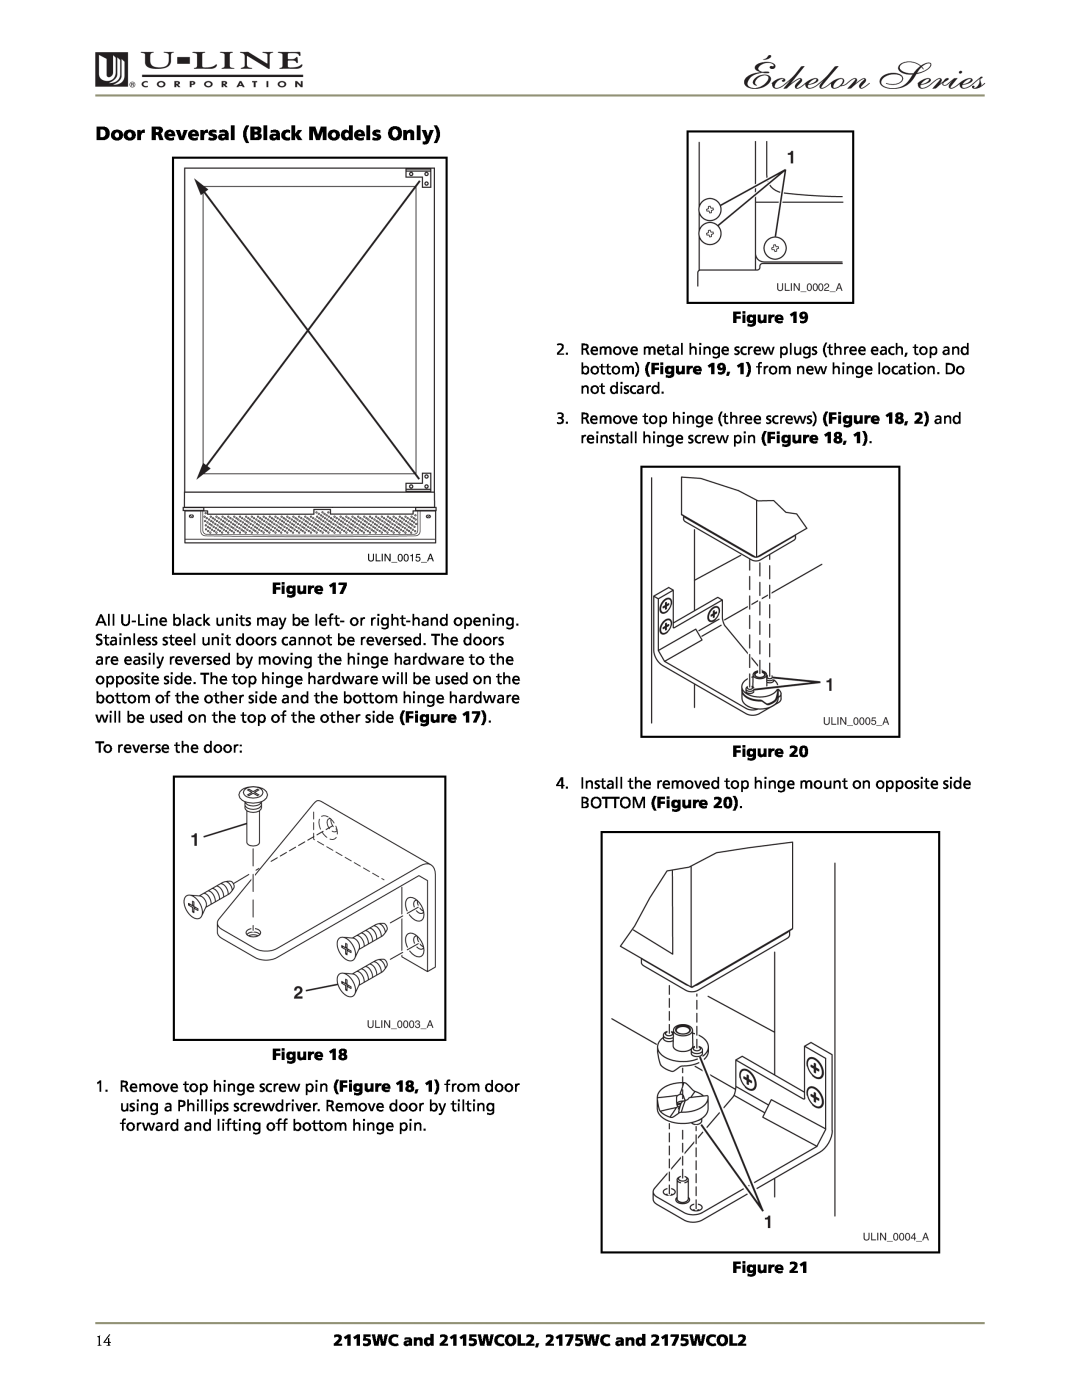 U-Line manual Door Reversal Black Models Only, 2115WC and 2115WCOL2, 2175WC and 2175WCOL2 